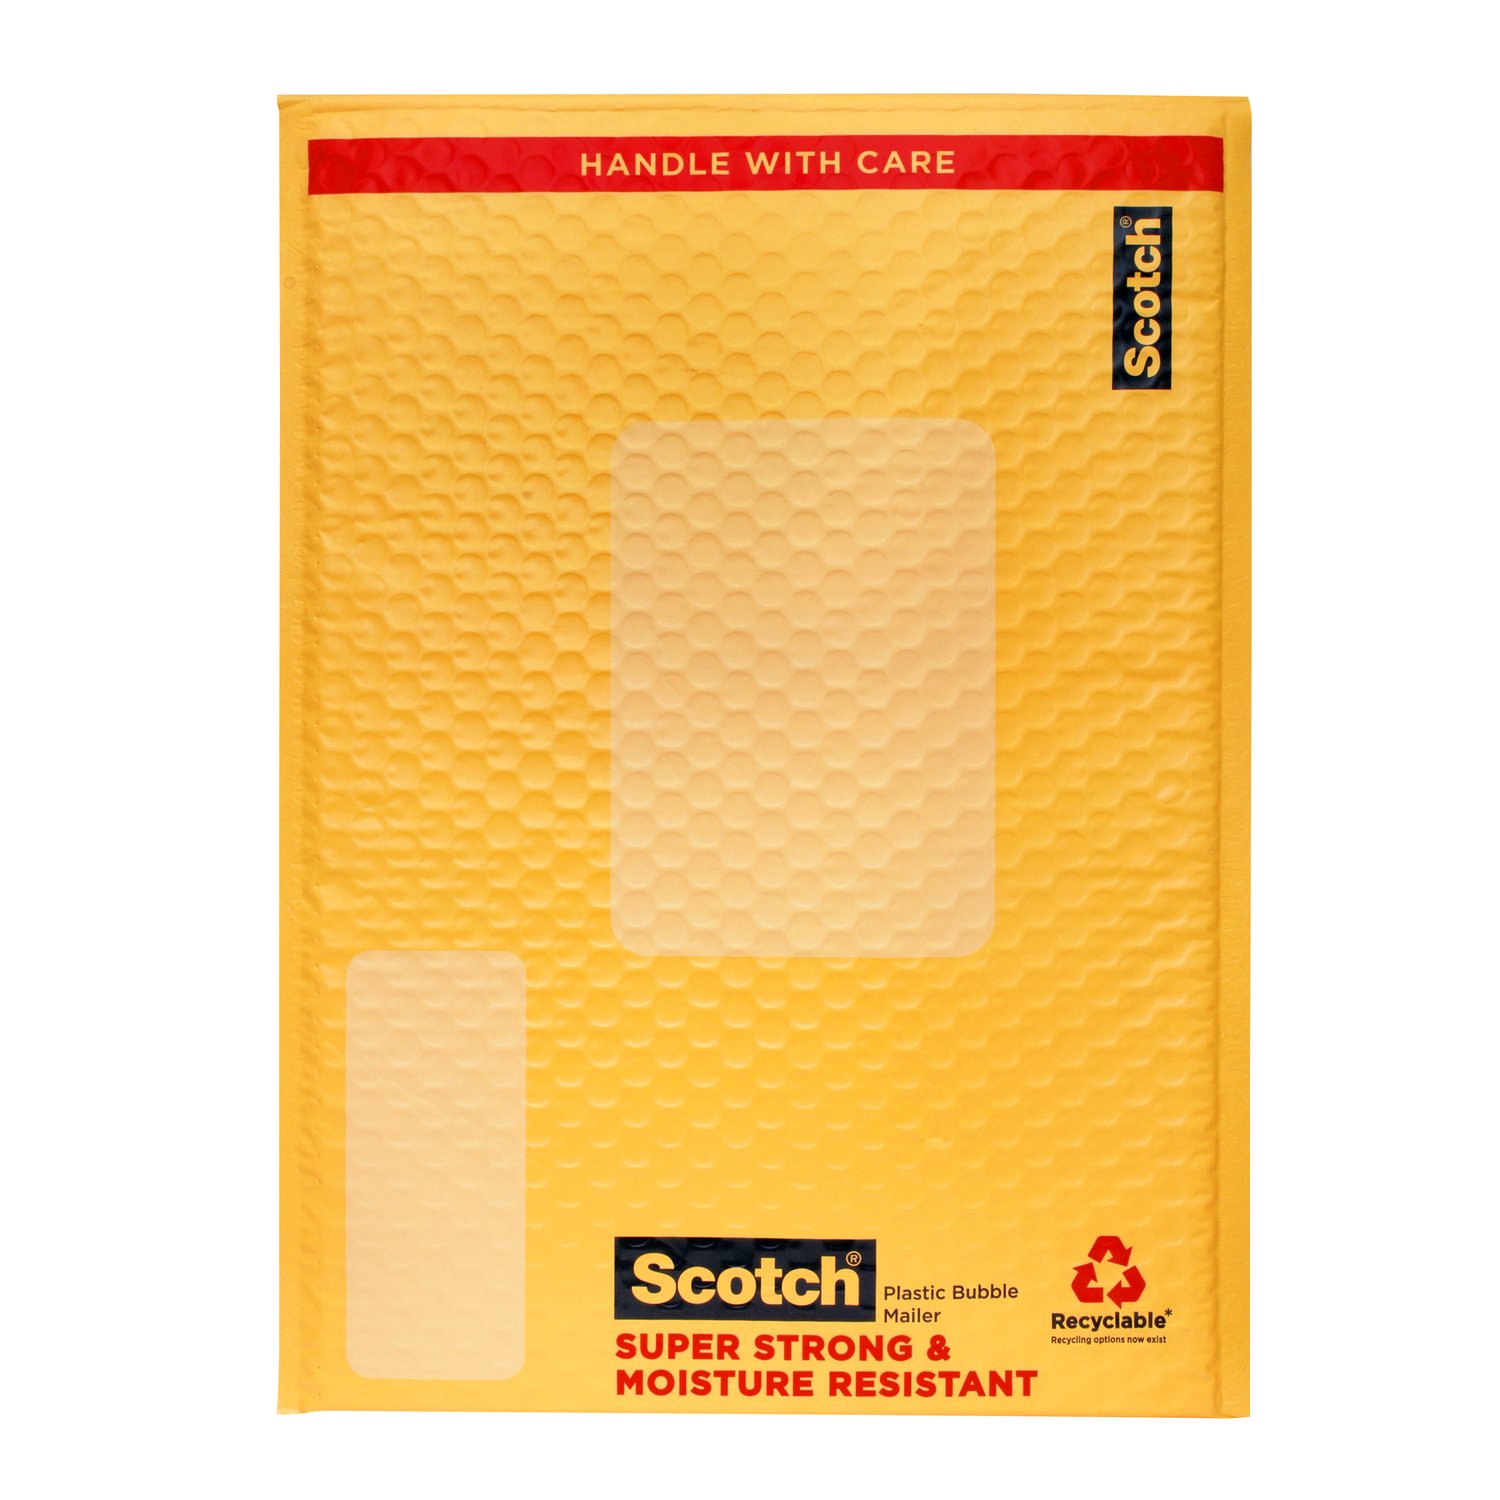 7010372515 - Scotch Poly Bubble Mailer 4-Pack, 8915-4, 10.5 in x 15.25 in Size #5,
12 Packs/Cs